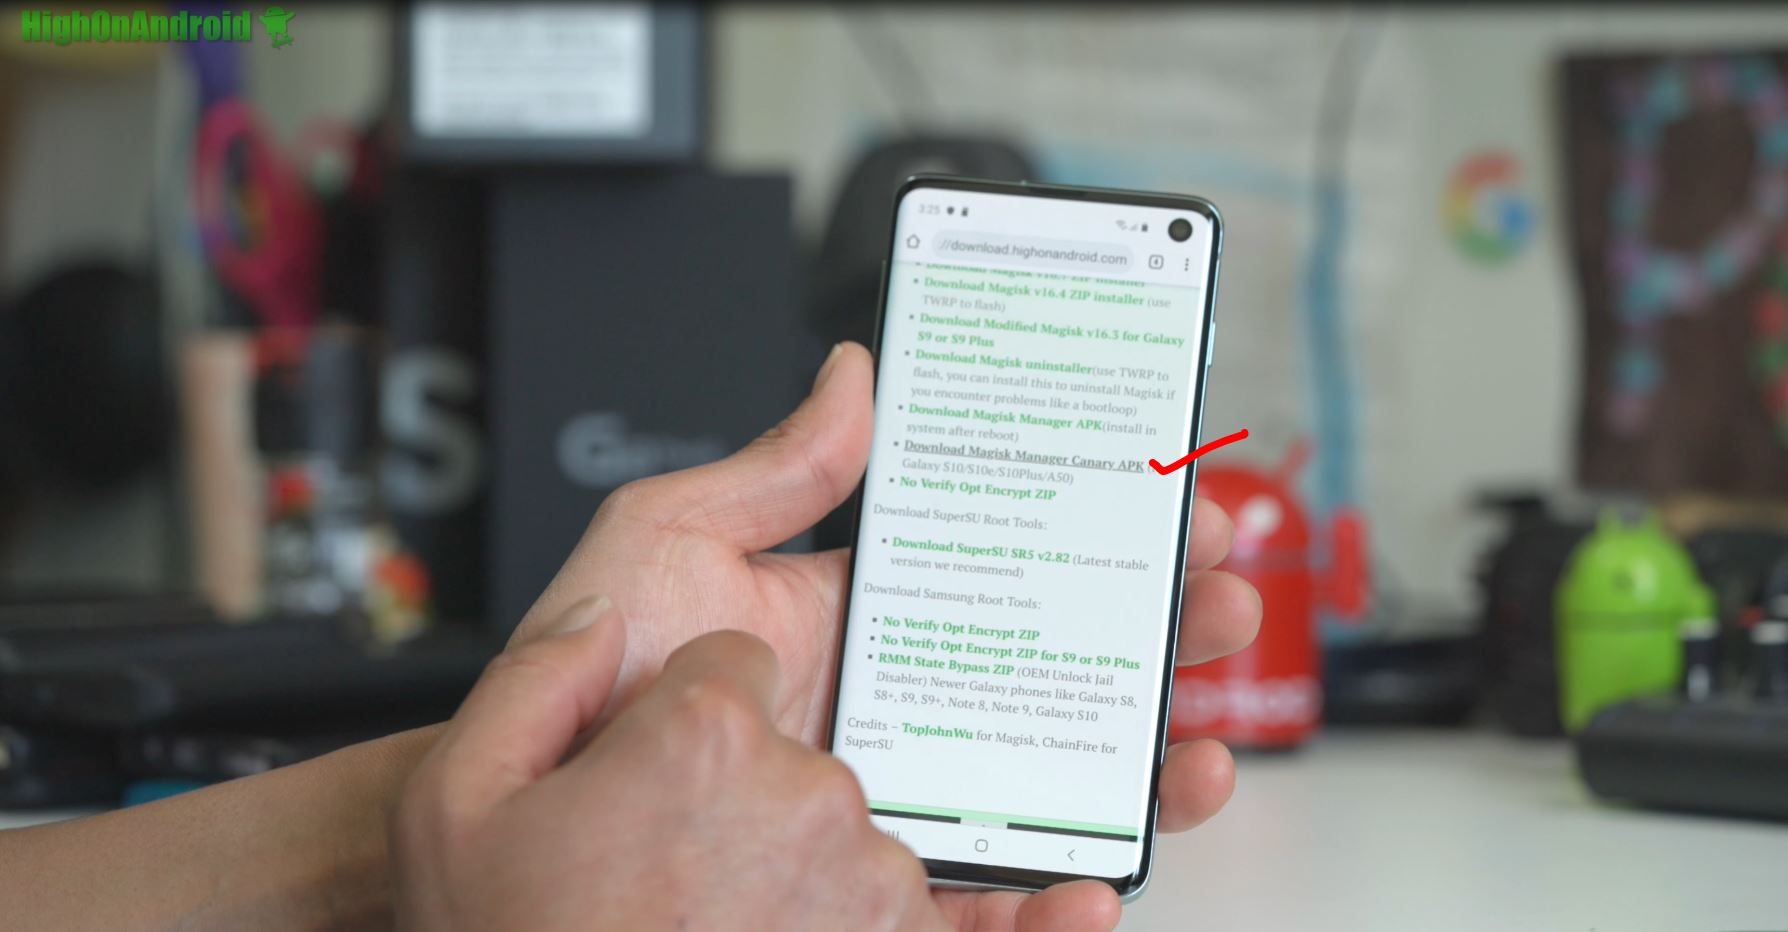 How To Root Galaxy S10 S10e S10 Plus Or A50 Exynos Only